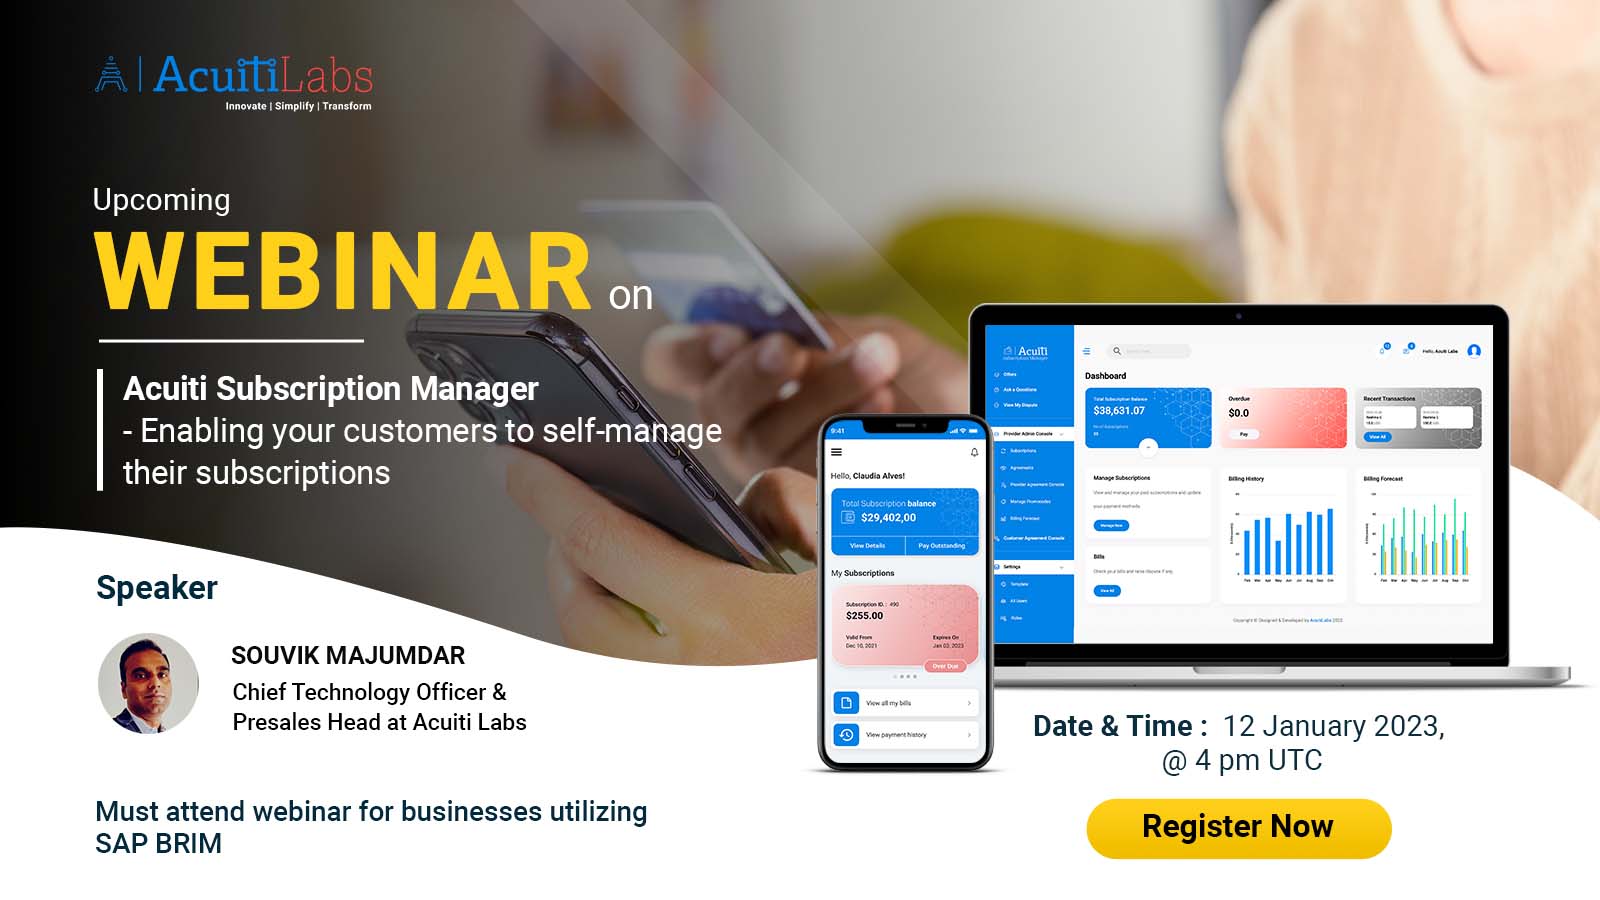 Upcoming Webinar on Acuiti Subscription Manager, Online Event